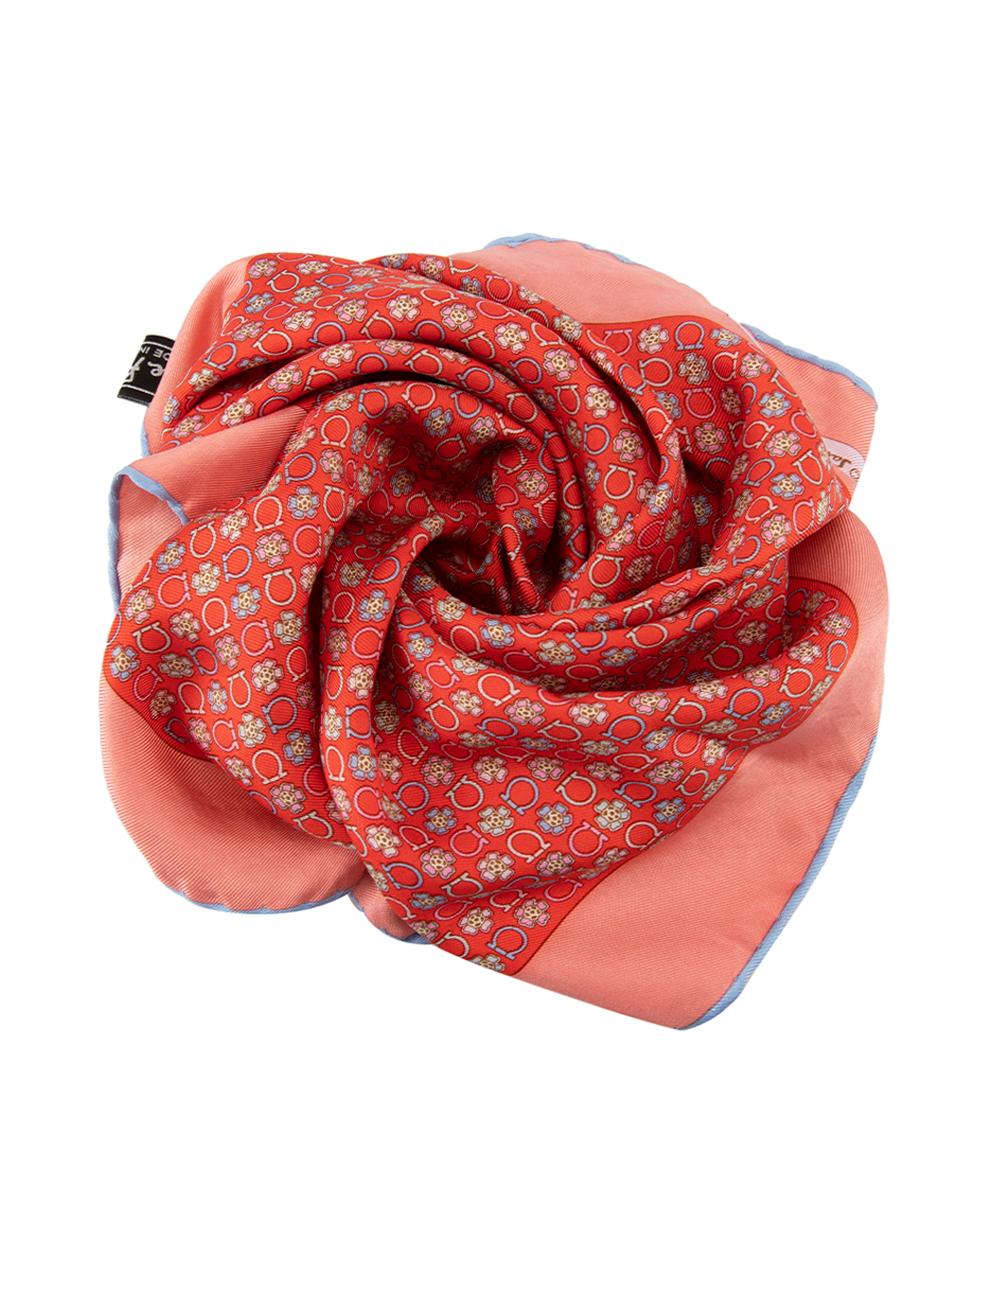 CONDITION is Good. Minor wear to scarf is evident. Light wear to the border with discoloured marks and a small pull to the weave on this used Salvatore Ferragamo designer resale item.



Details


Pink

Silk

Square scarf

Floral gancini print